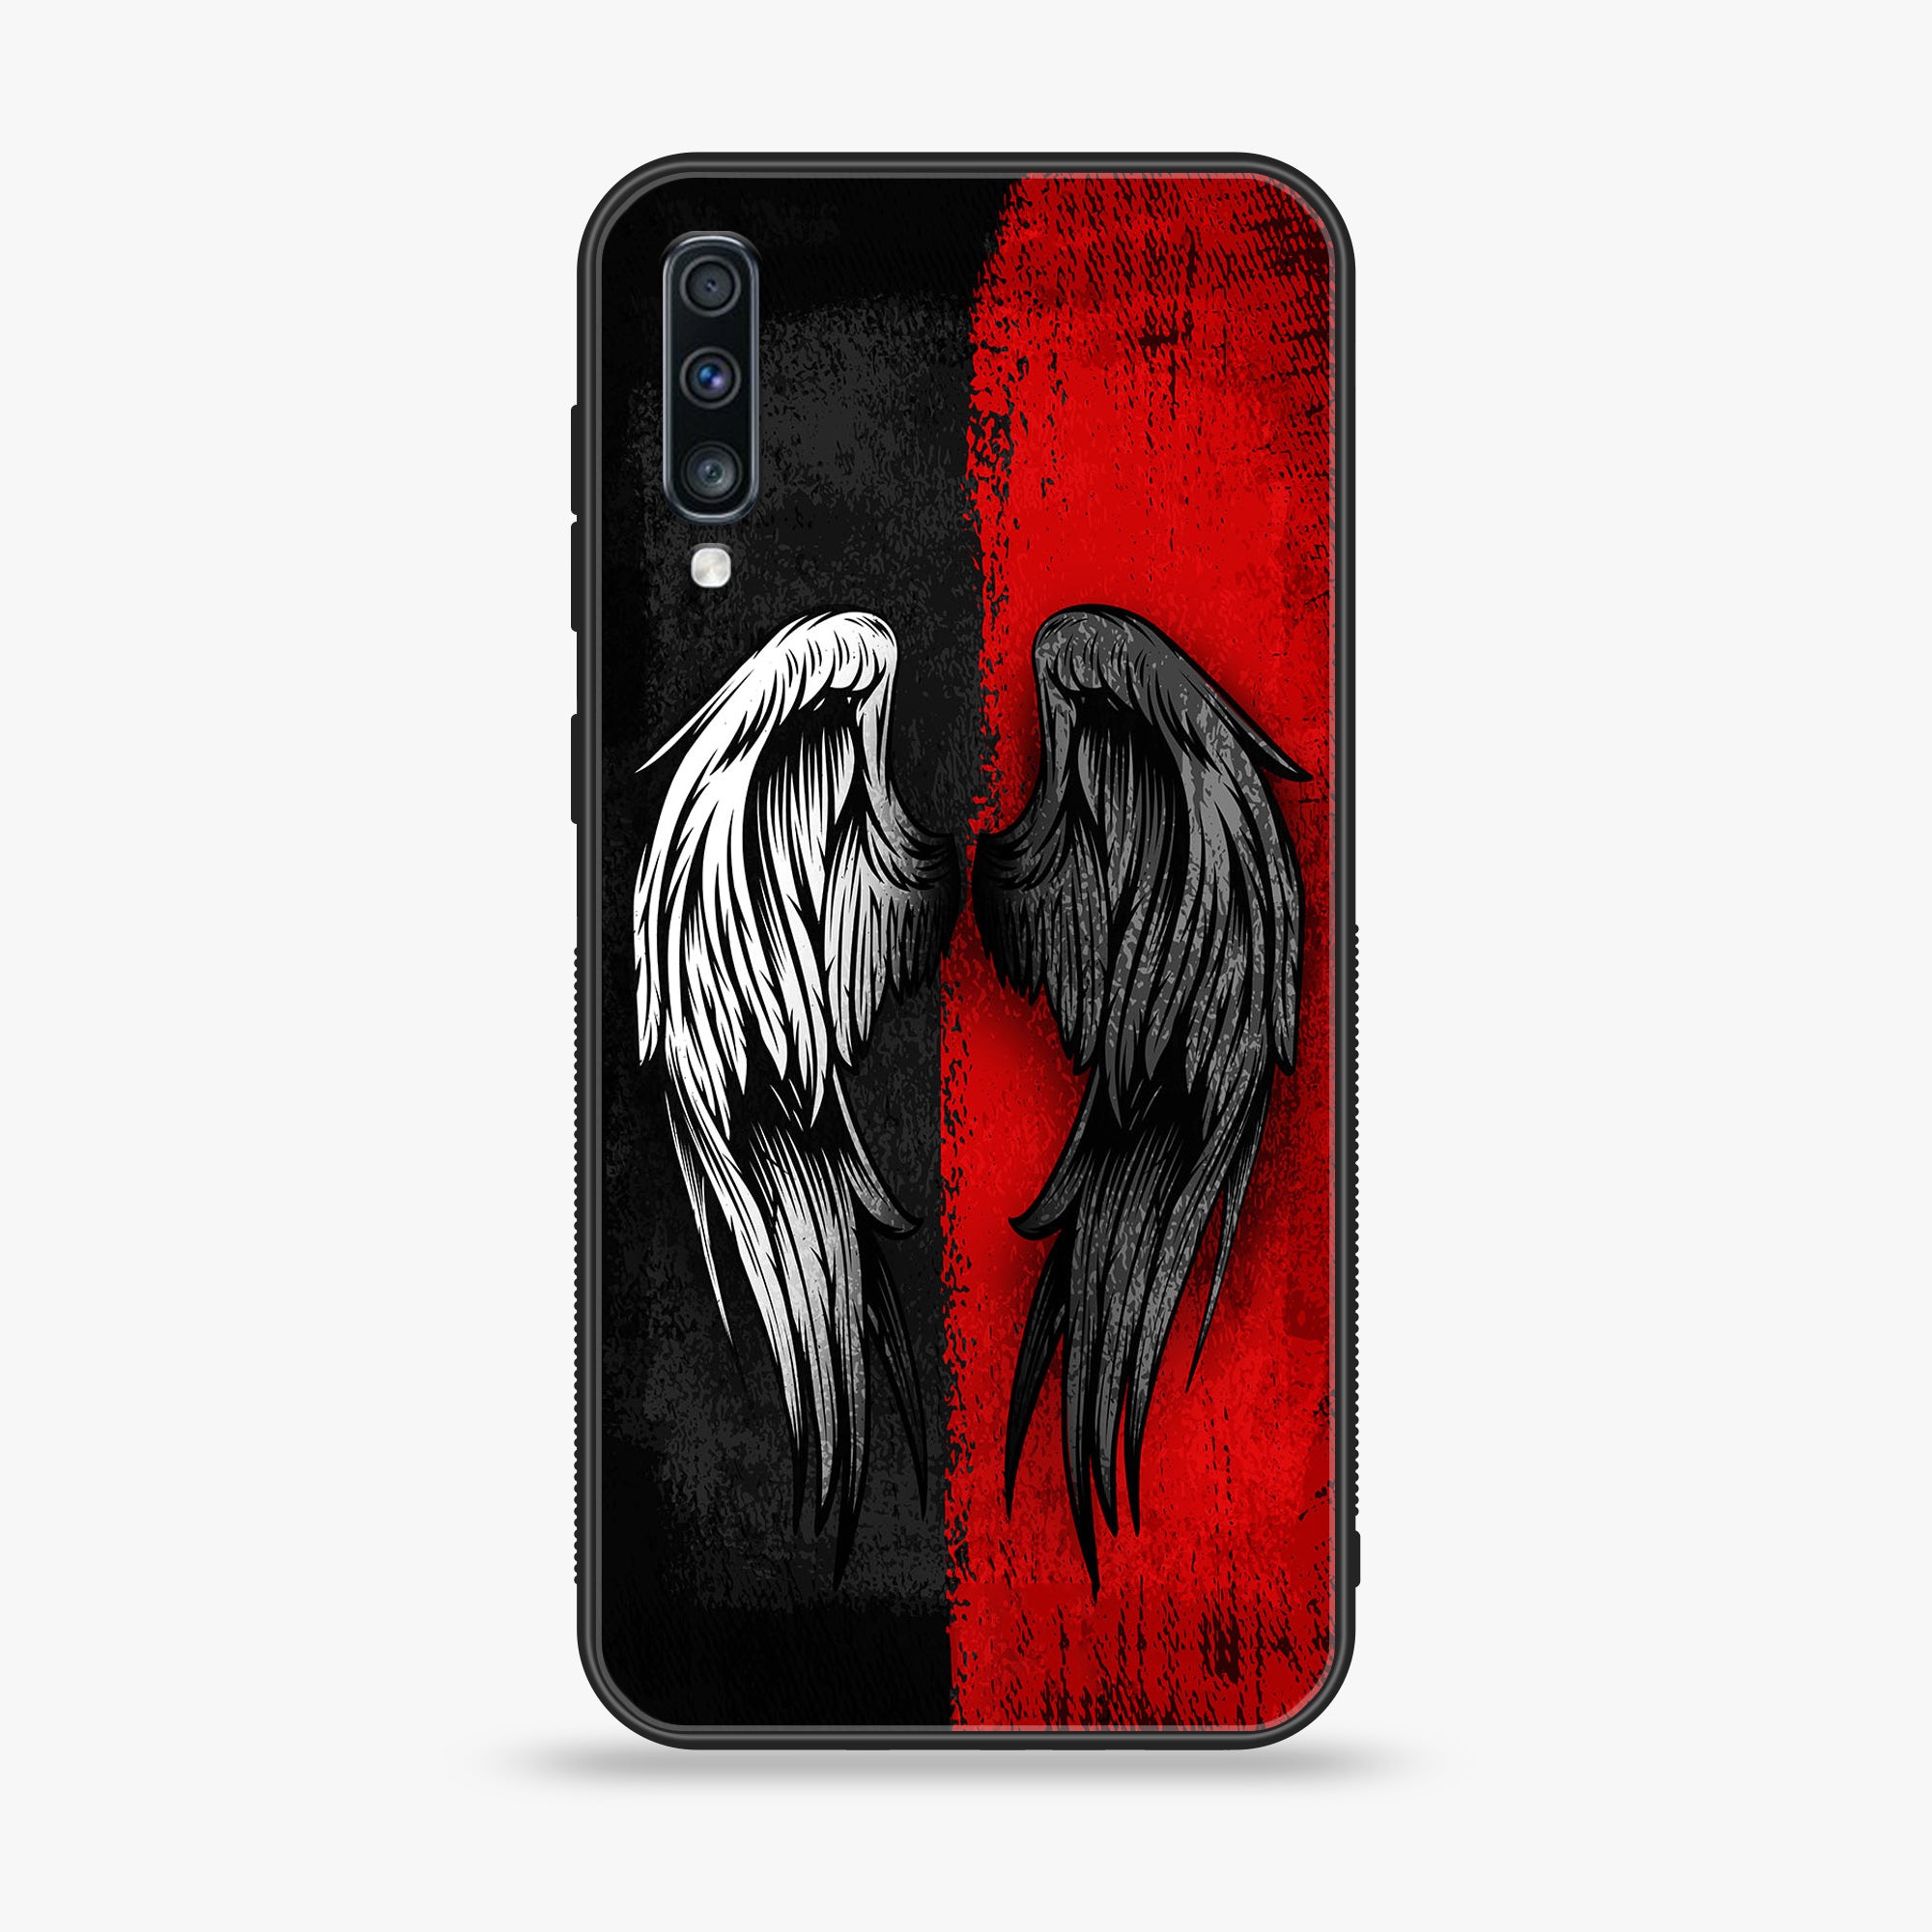 Samsung Galaxy A70 - Angel Wings 2.0  Series - Premium Printed Glass soft Bumper shock Proof Case